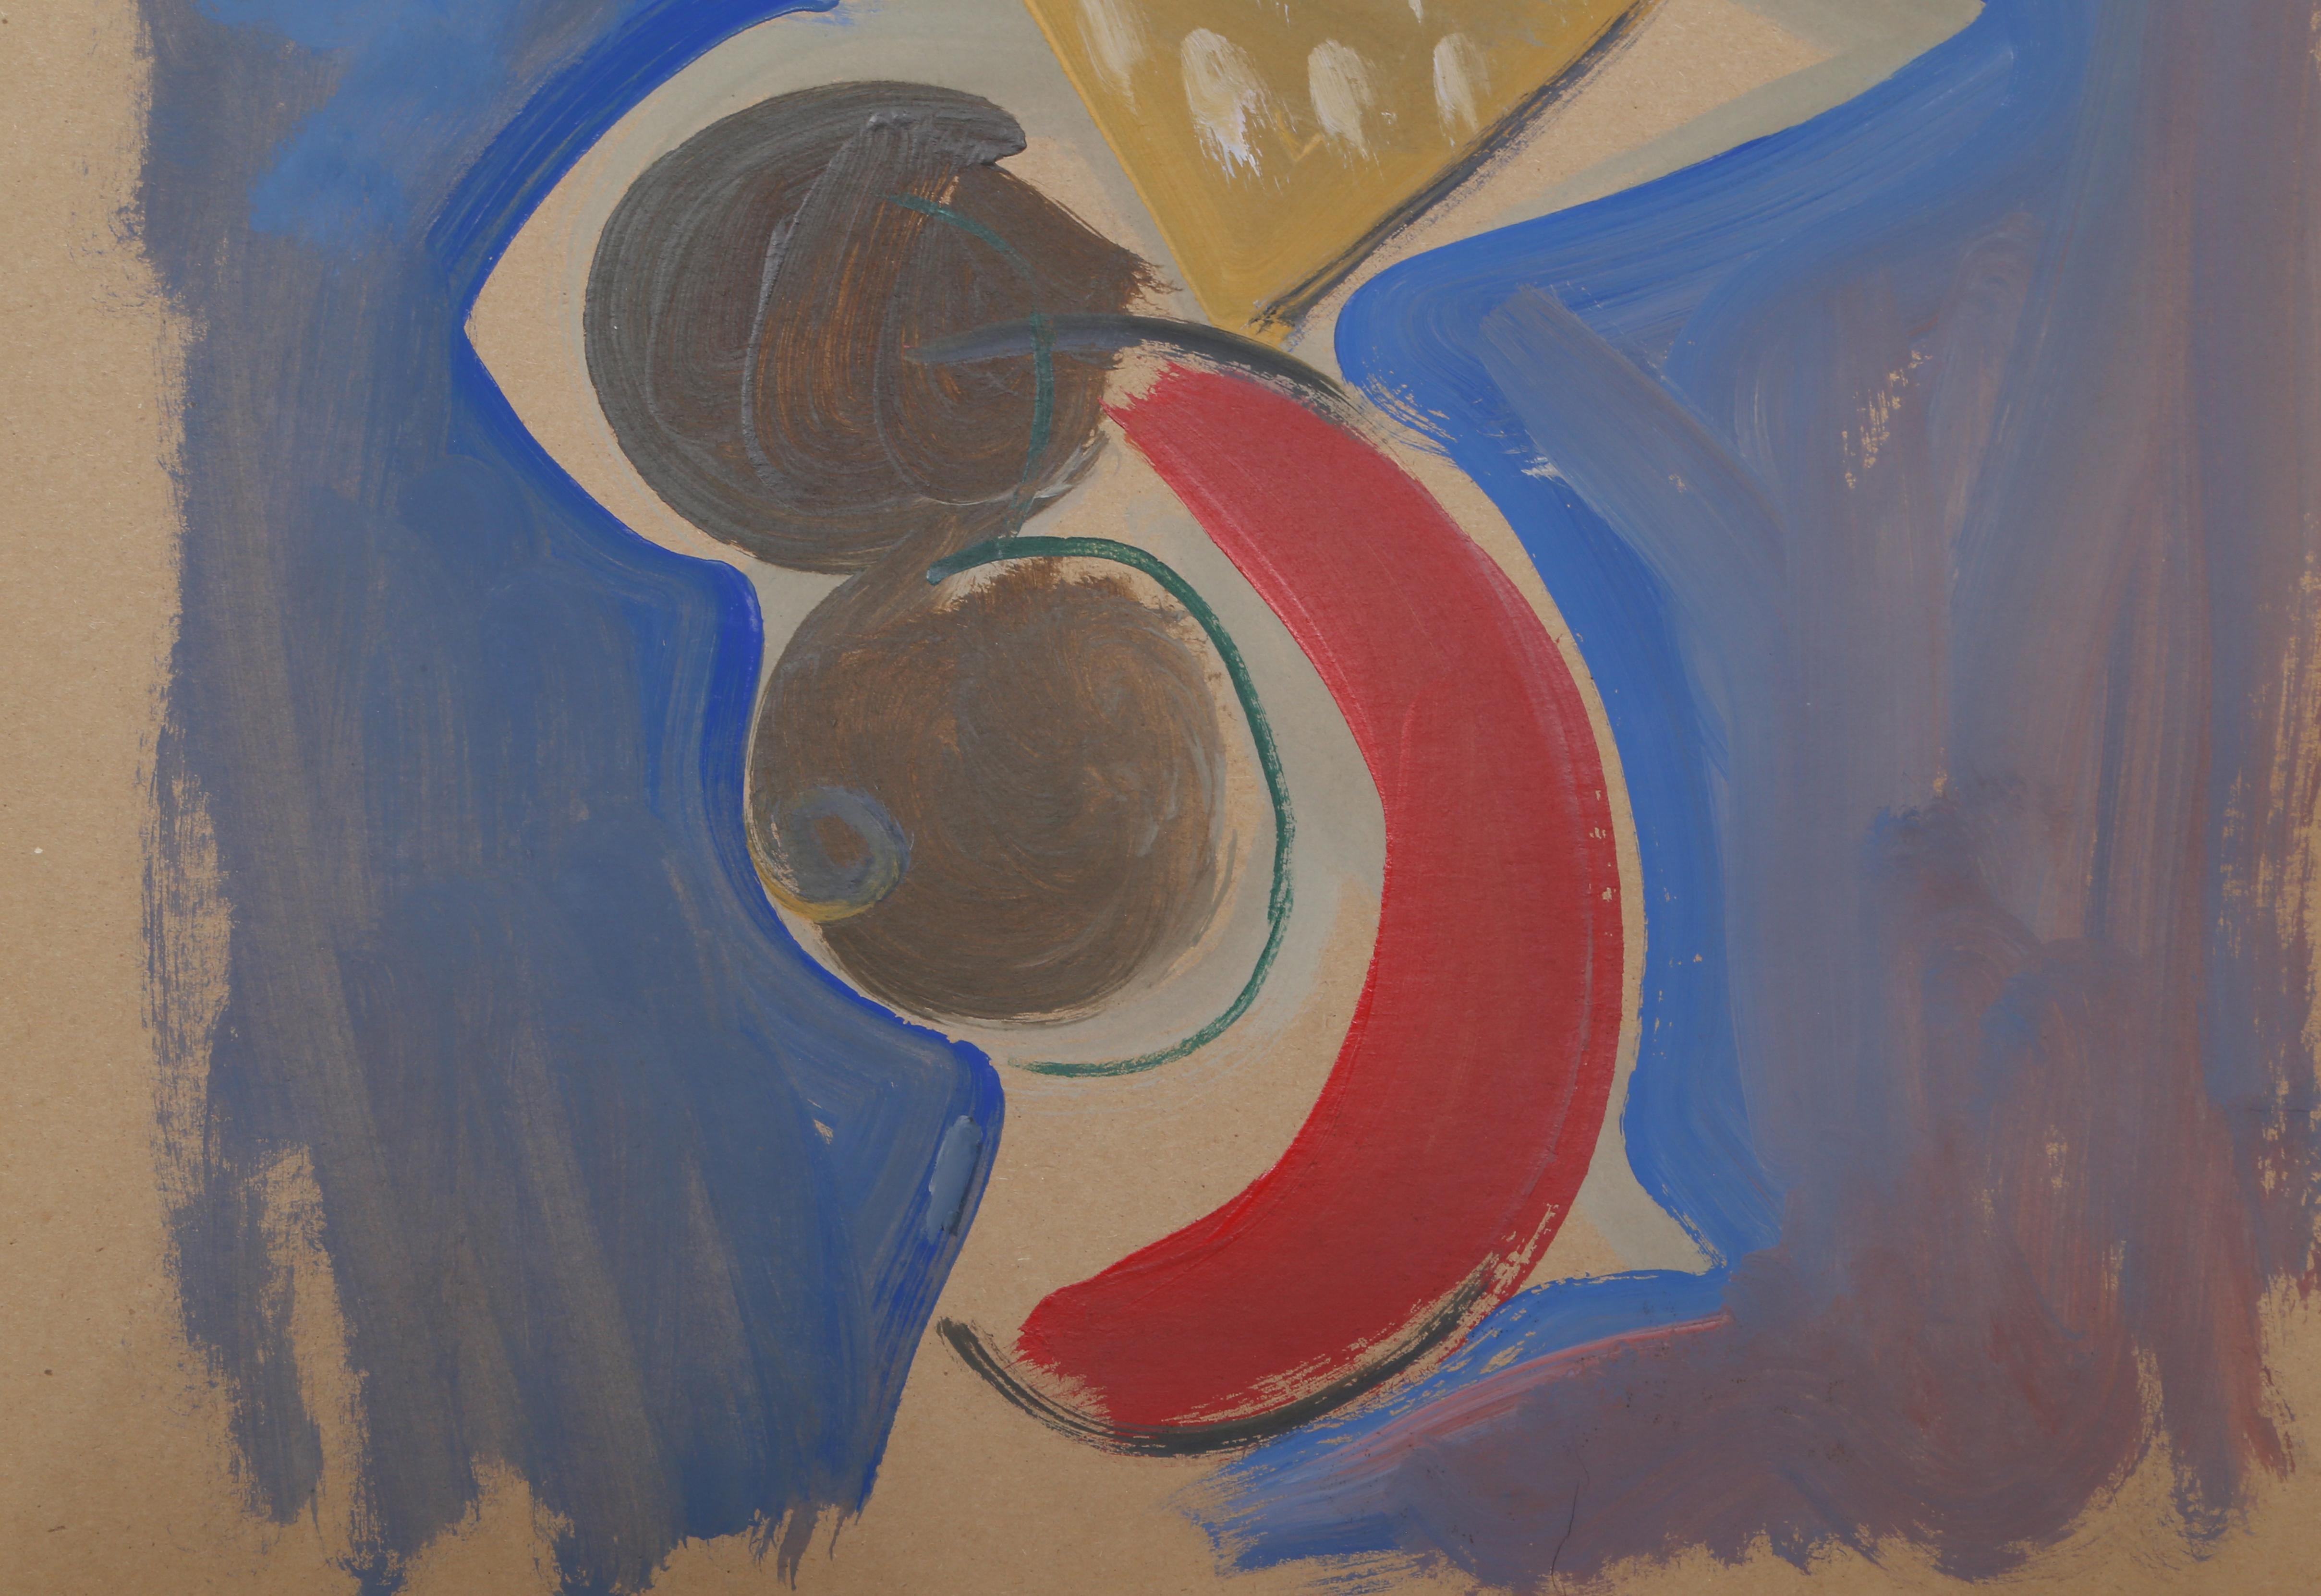 Artist: Moshe Rosentalis, Lithuanian (1922 - 2008)
Title: Abstract Still Life
Year: 1991
Medium: Gouache on Board, signed and dated
Size: 27.5 x 20 inches